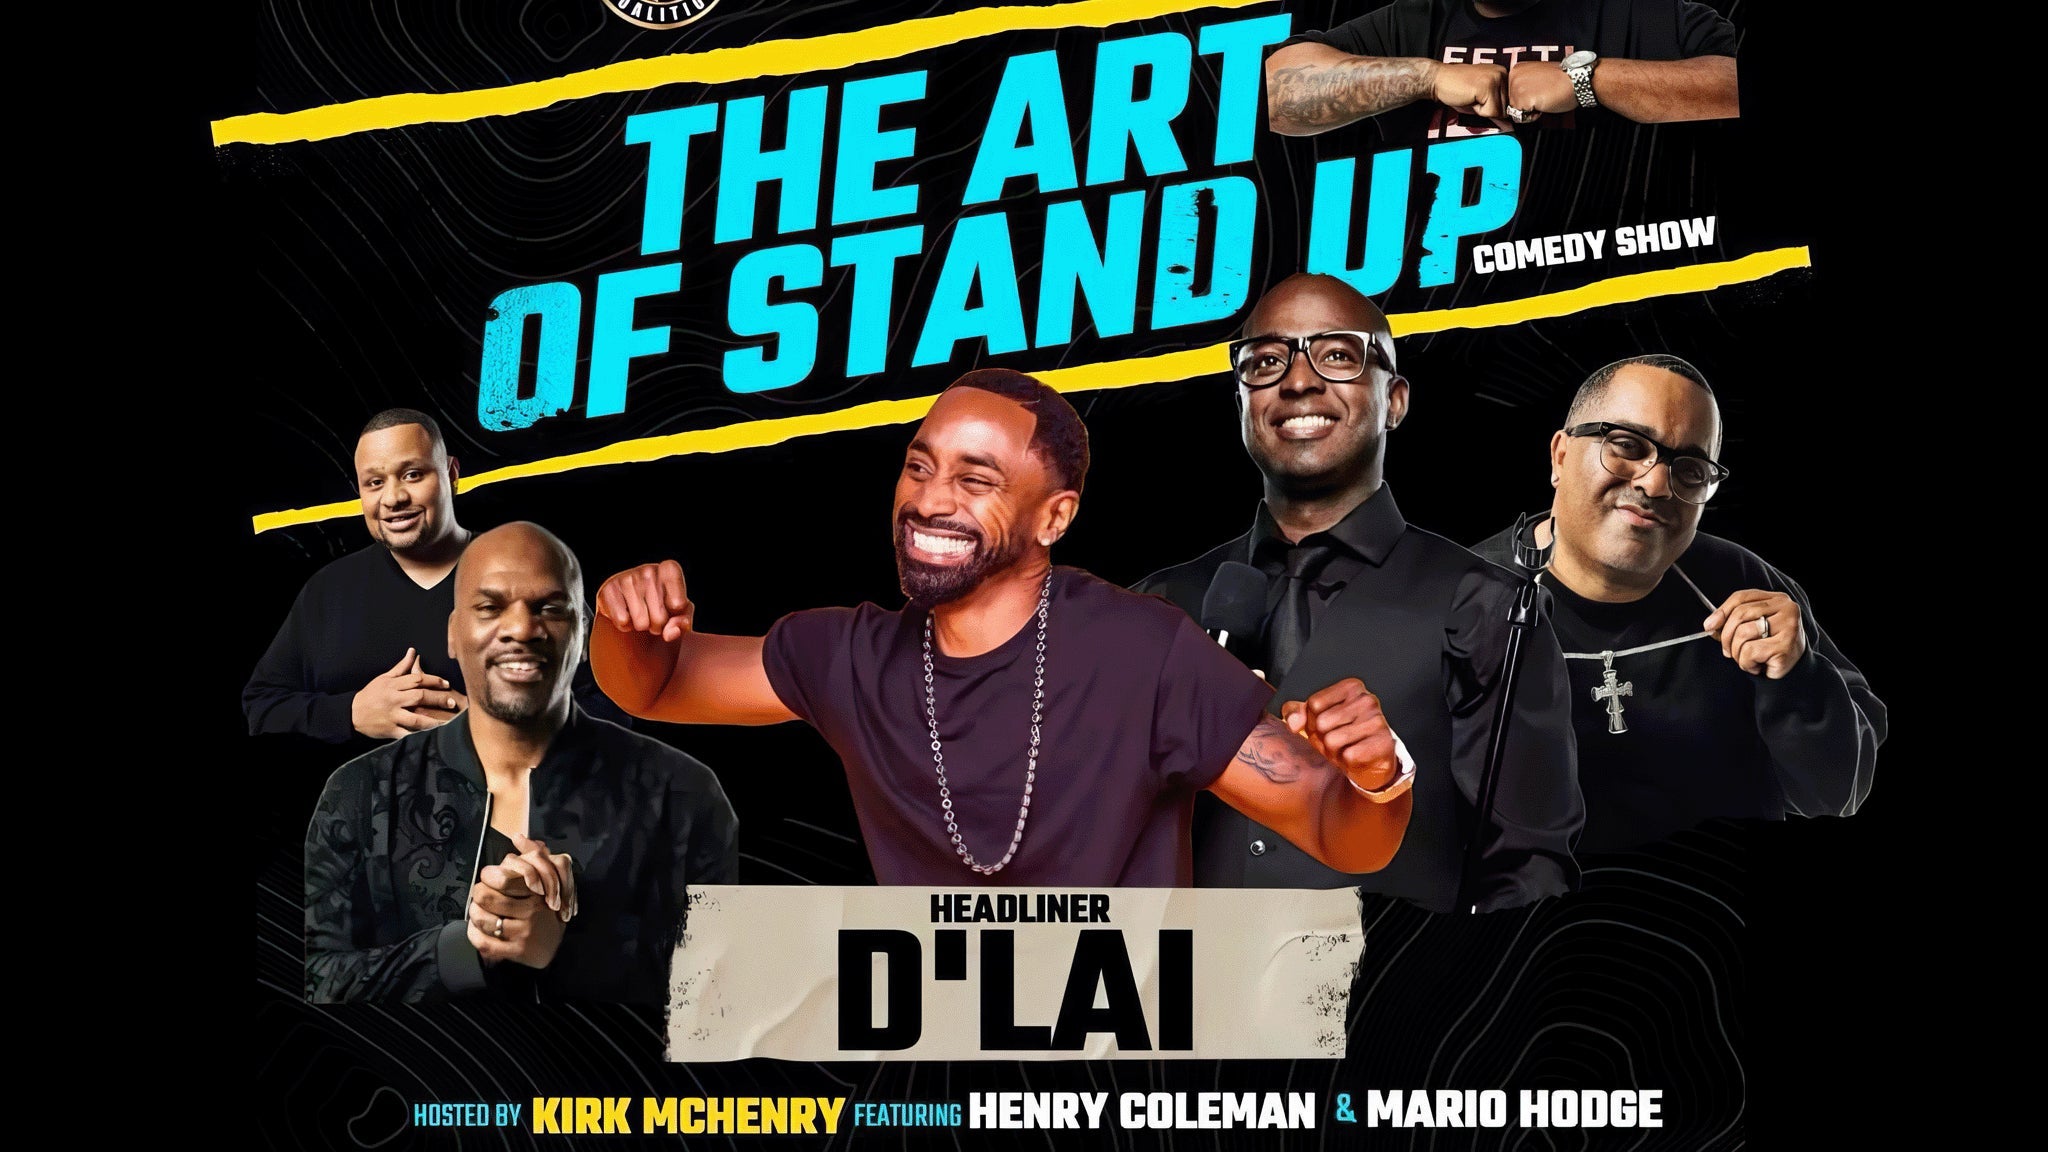 The Art of Standup with D'LAI, Henry Coleman,Kirk McHenry, Mario Hodge